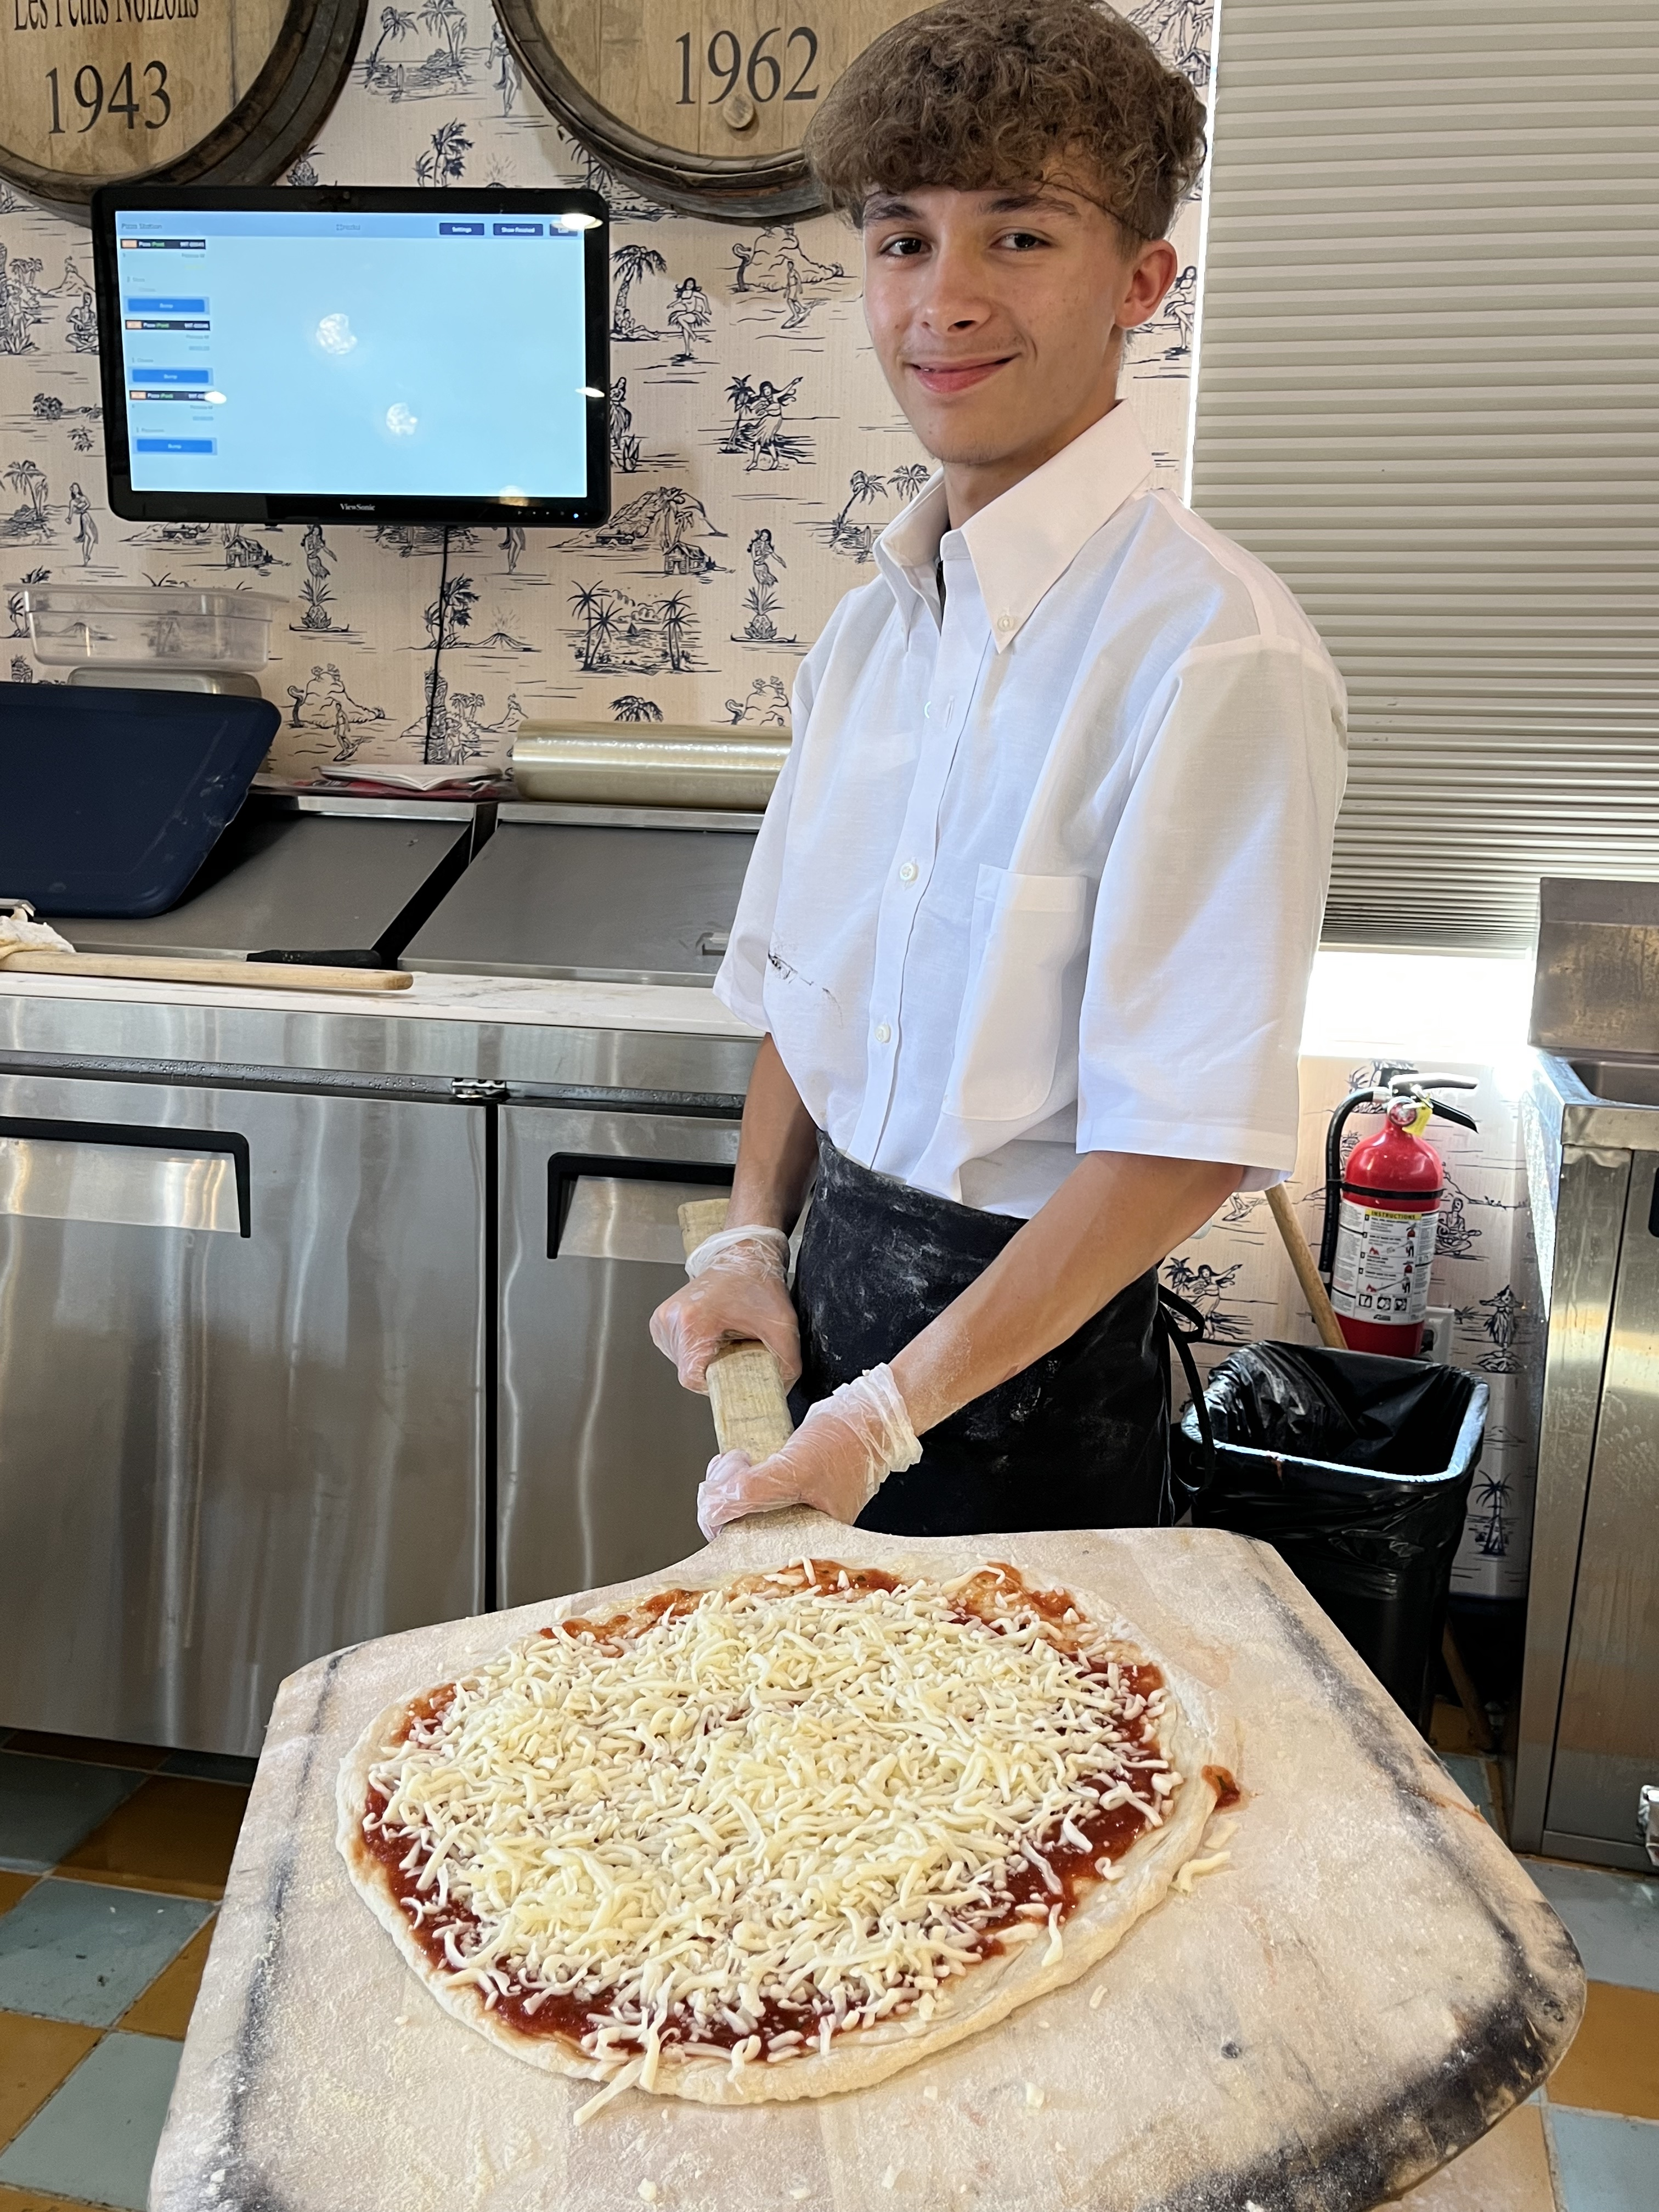 An employee at Kobe Club Burgers, wearing a white dress shirt and black slacks, holds a pizza peel with an uncooked cheese pizza on it